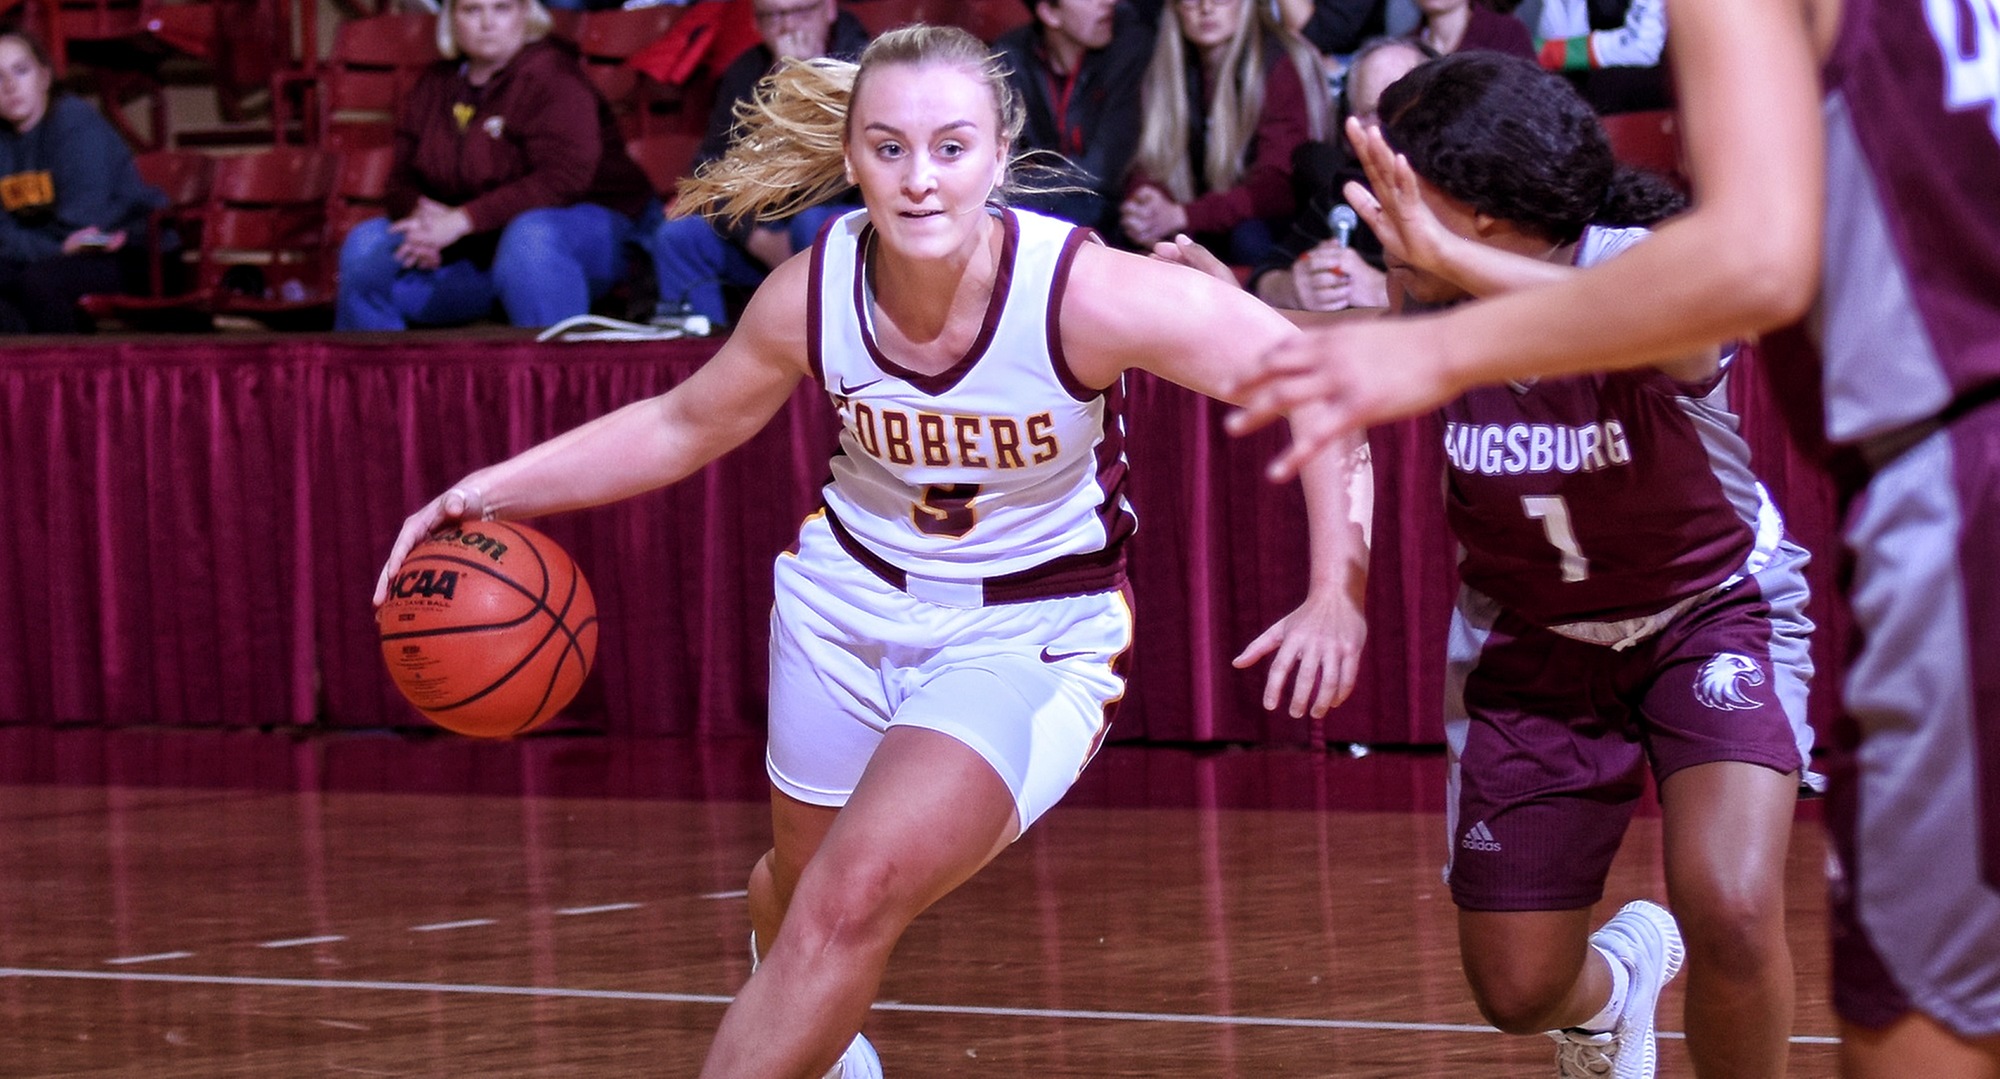 Sophomore Autumn Thompson made four 3-pointers and finished with a team-high 18 points in the Cobbers' game at Augsburg.